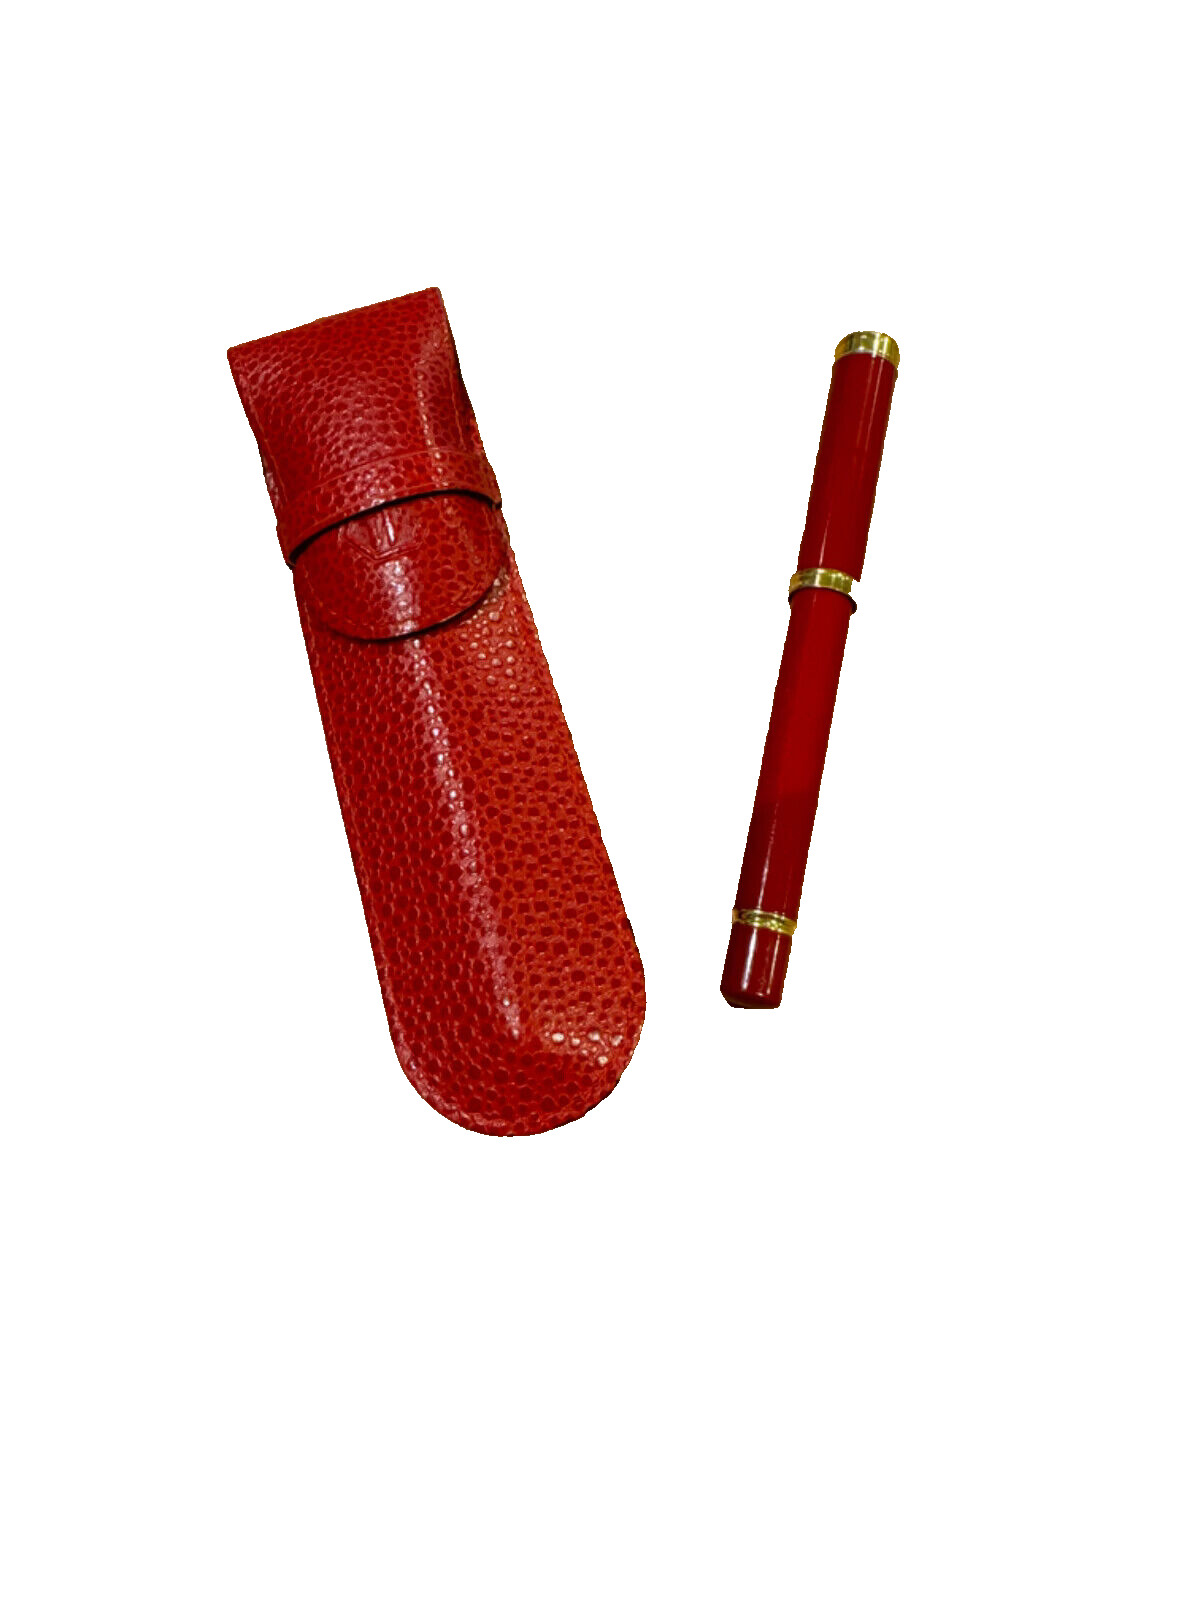 Waterman Lady Charlotte Ball Point Ladies\' Purse Pen; Red Lacquer; 